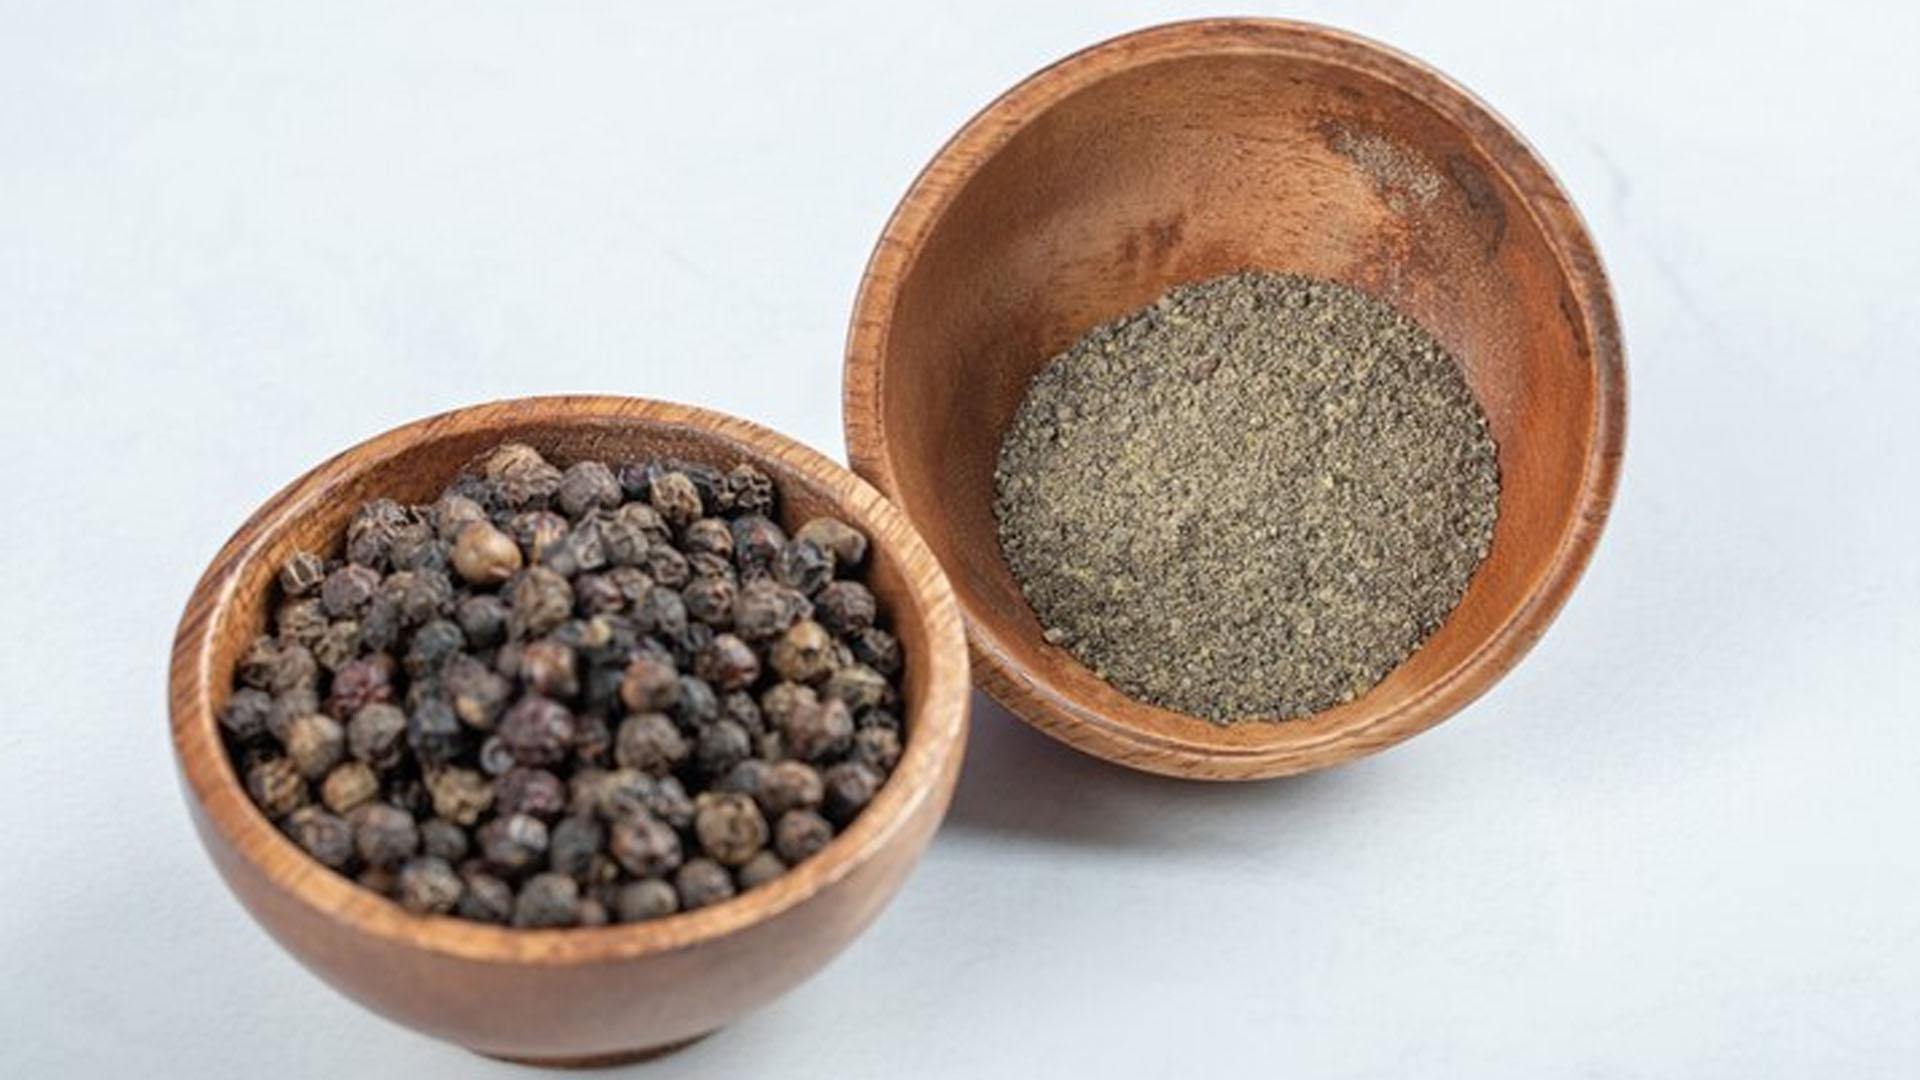 Black Pepper: Benefits, Nutritional Information and Uses